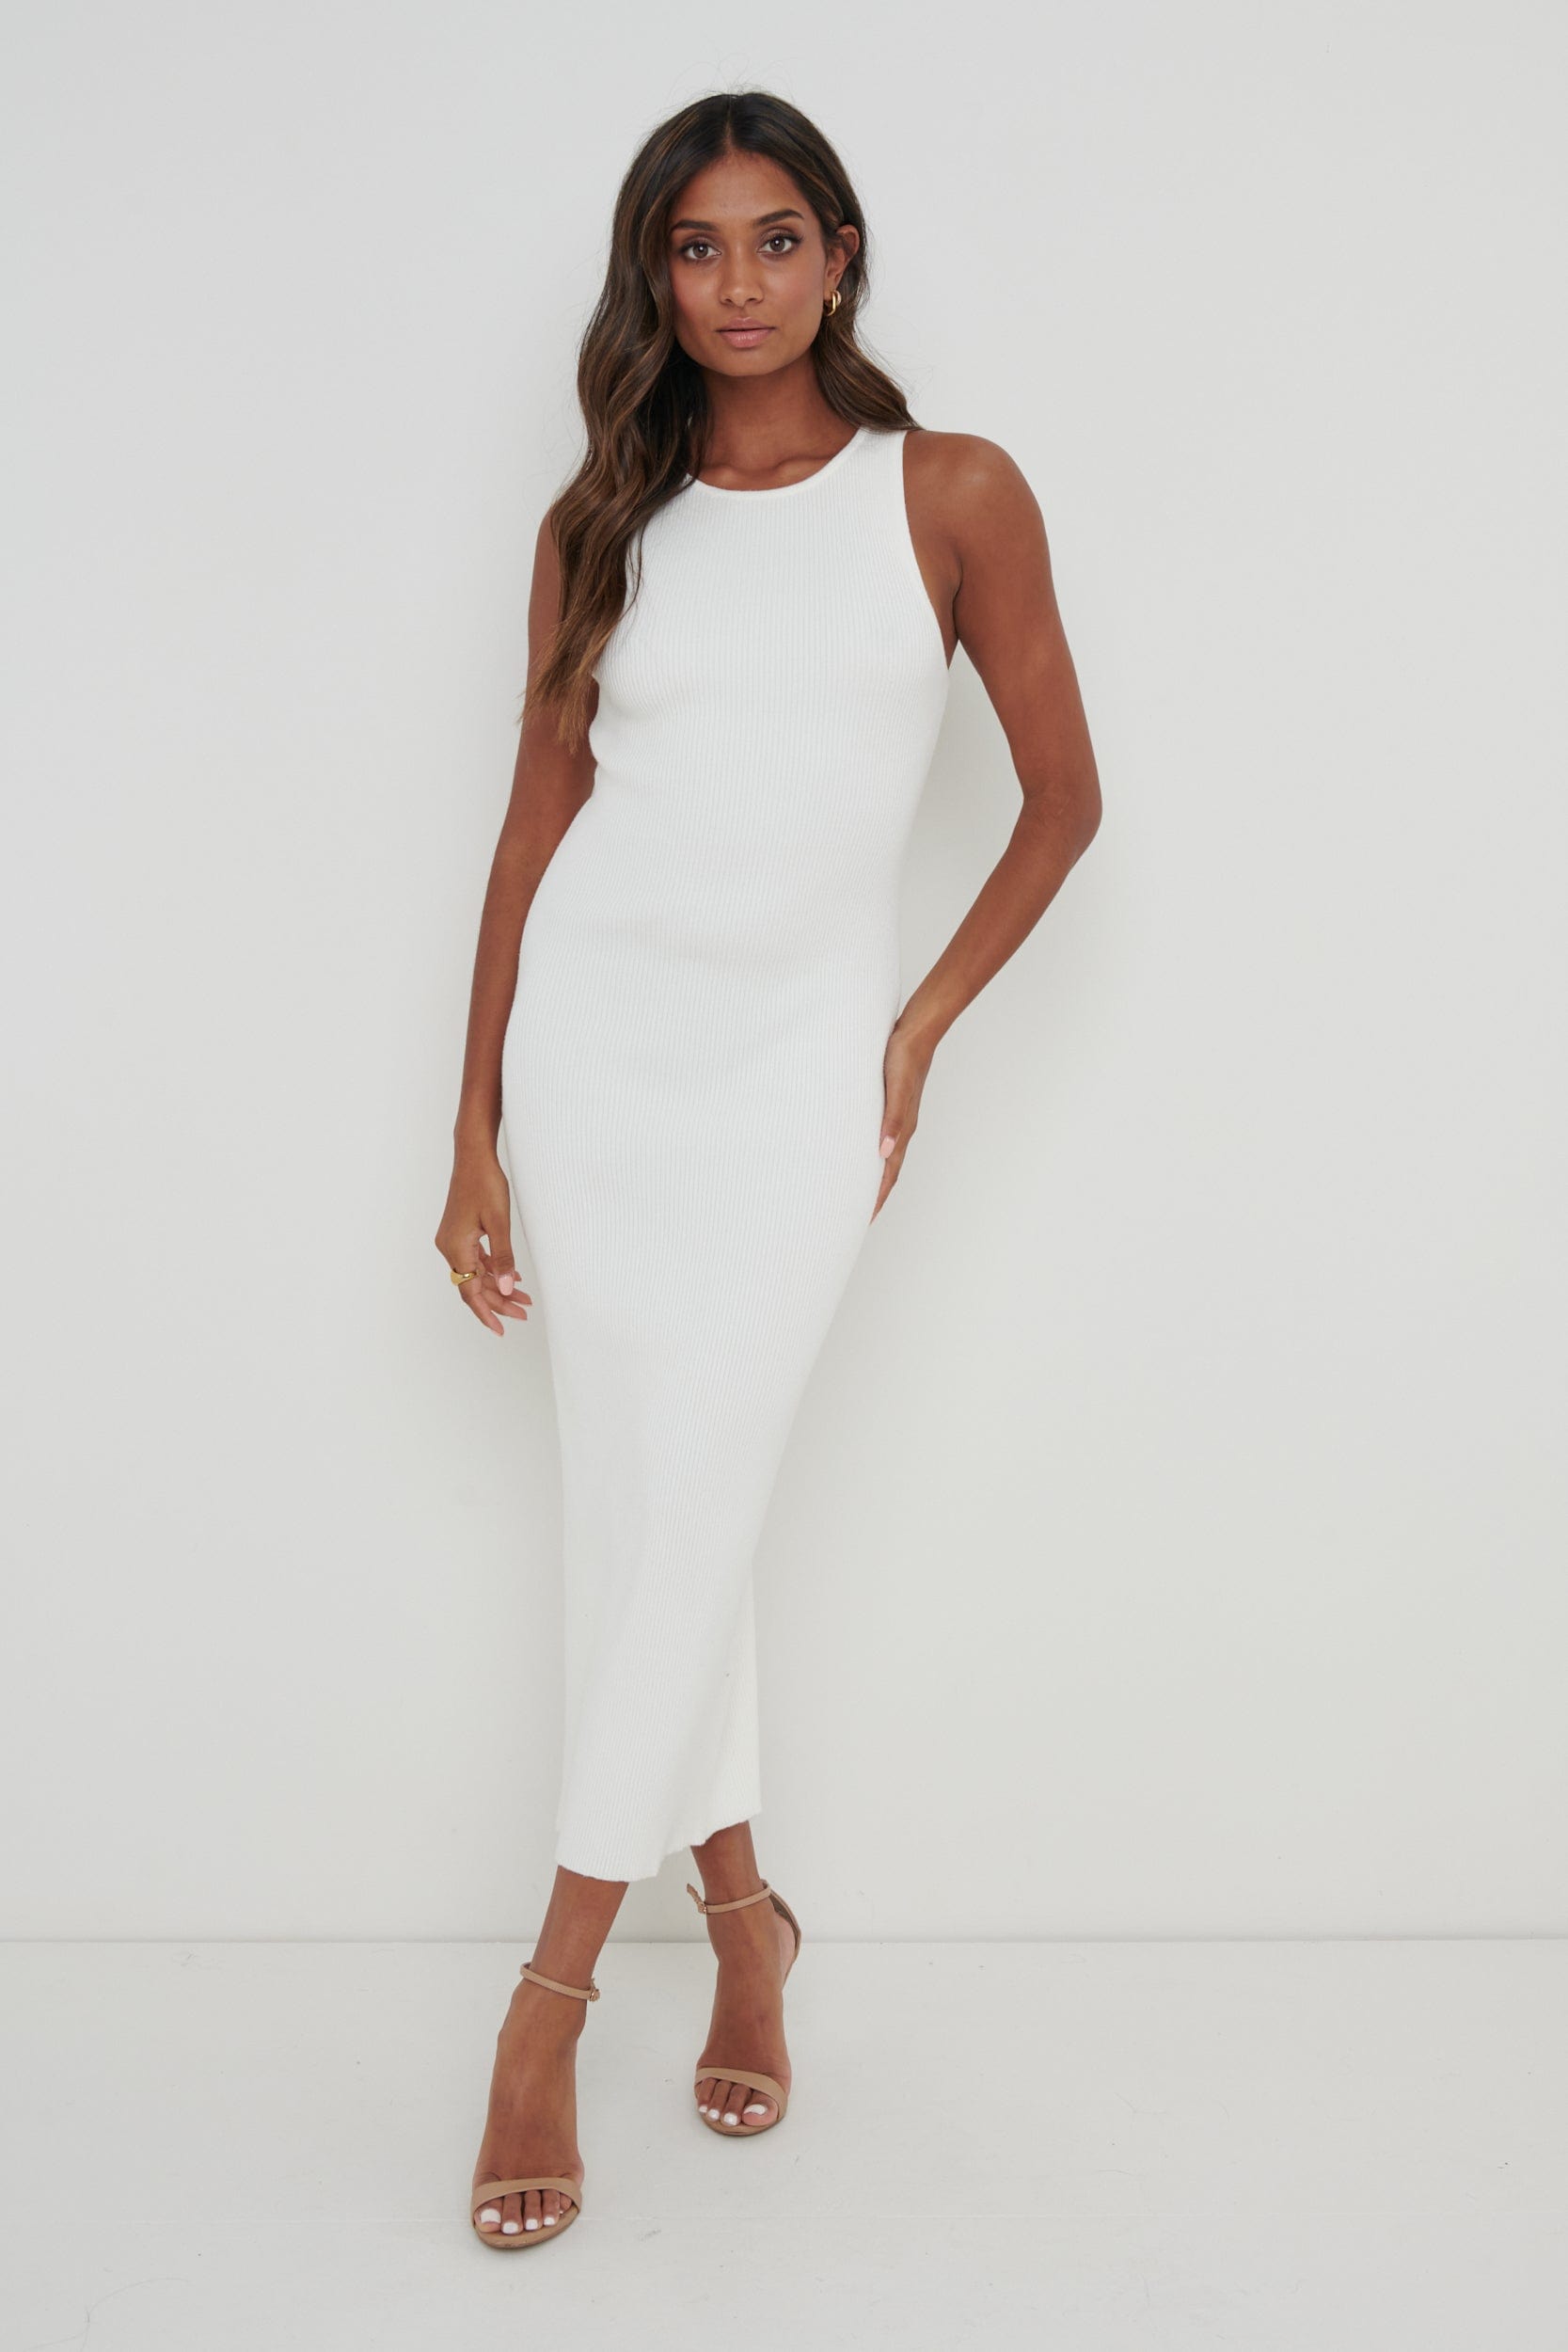 2 Ribbed Bodycon Midi Dresses That Are Flattering & Comfy (For